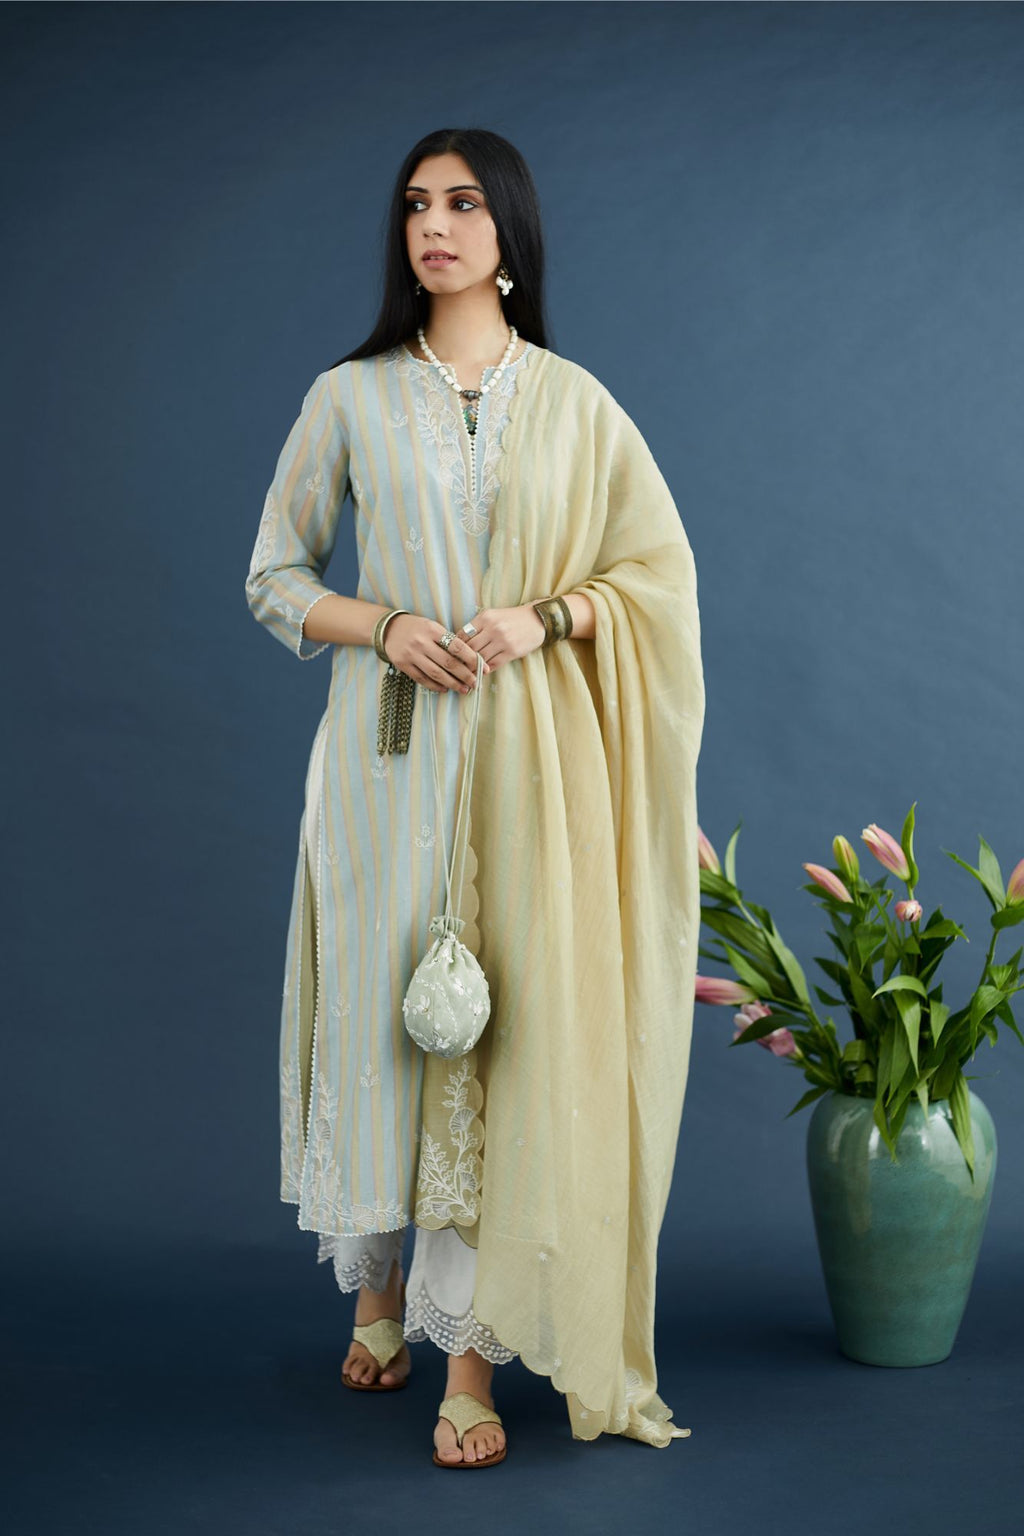 Olive cotton Chanderi dupatta with cutwork embroidery and scalloped edges